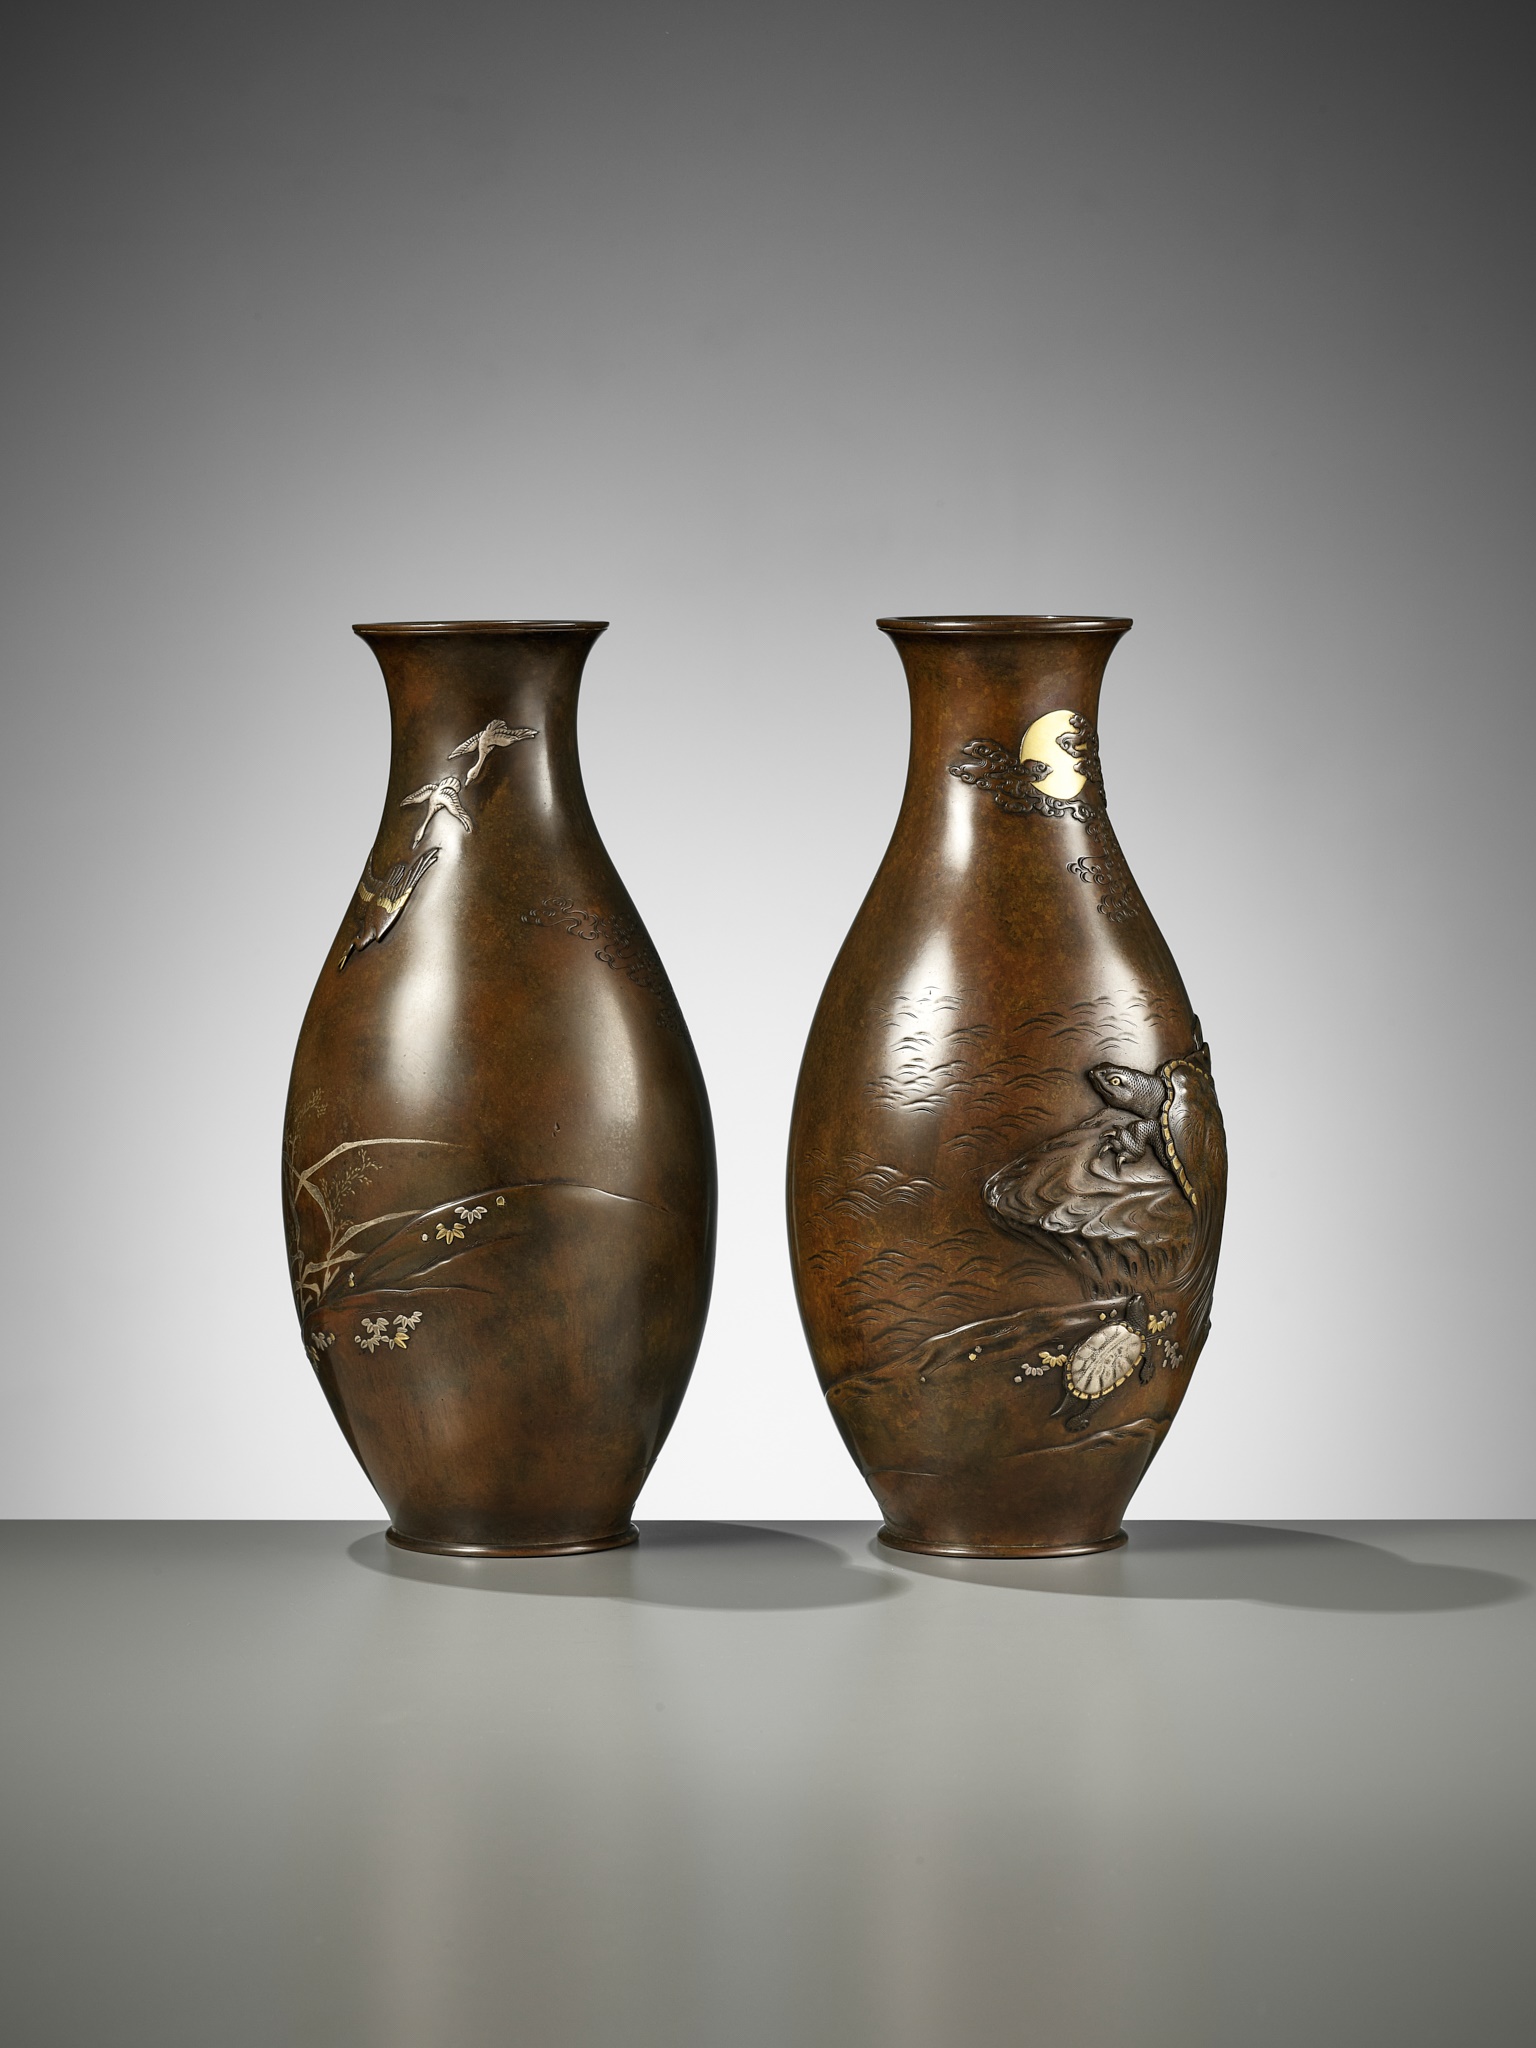 CHOMIN: A SUPERB PAIR OF INLAID BRONZE VASES WITH MINOGAME AND GEESE - Image 8 of 12